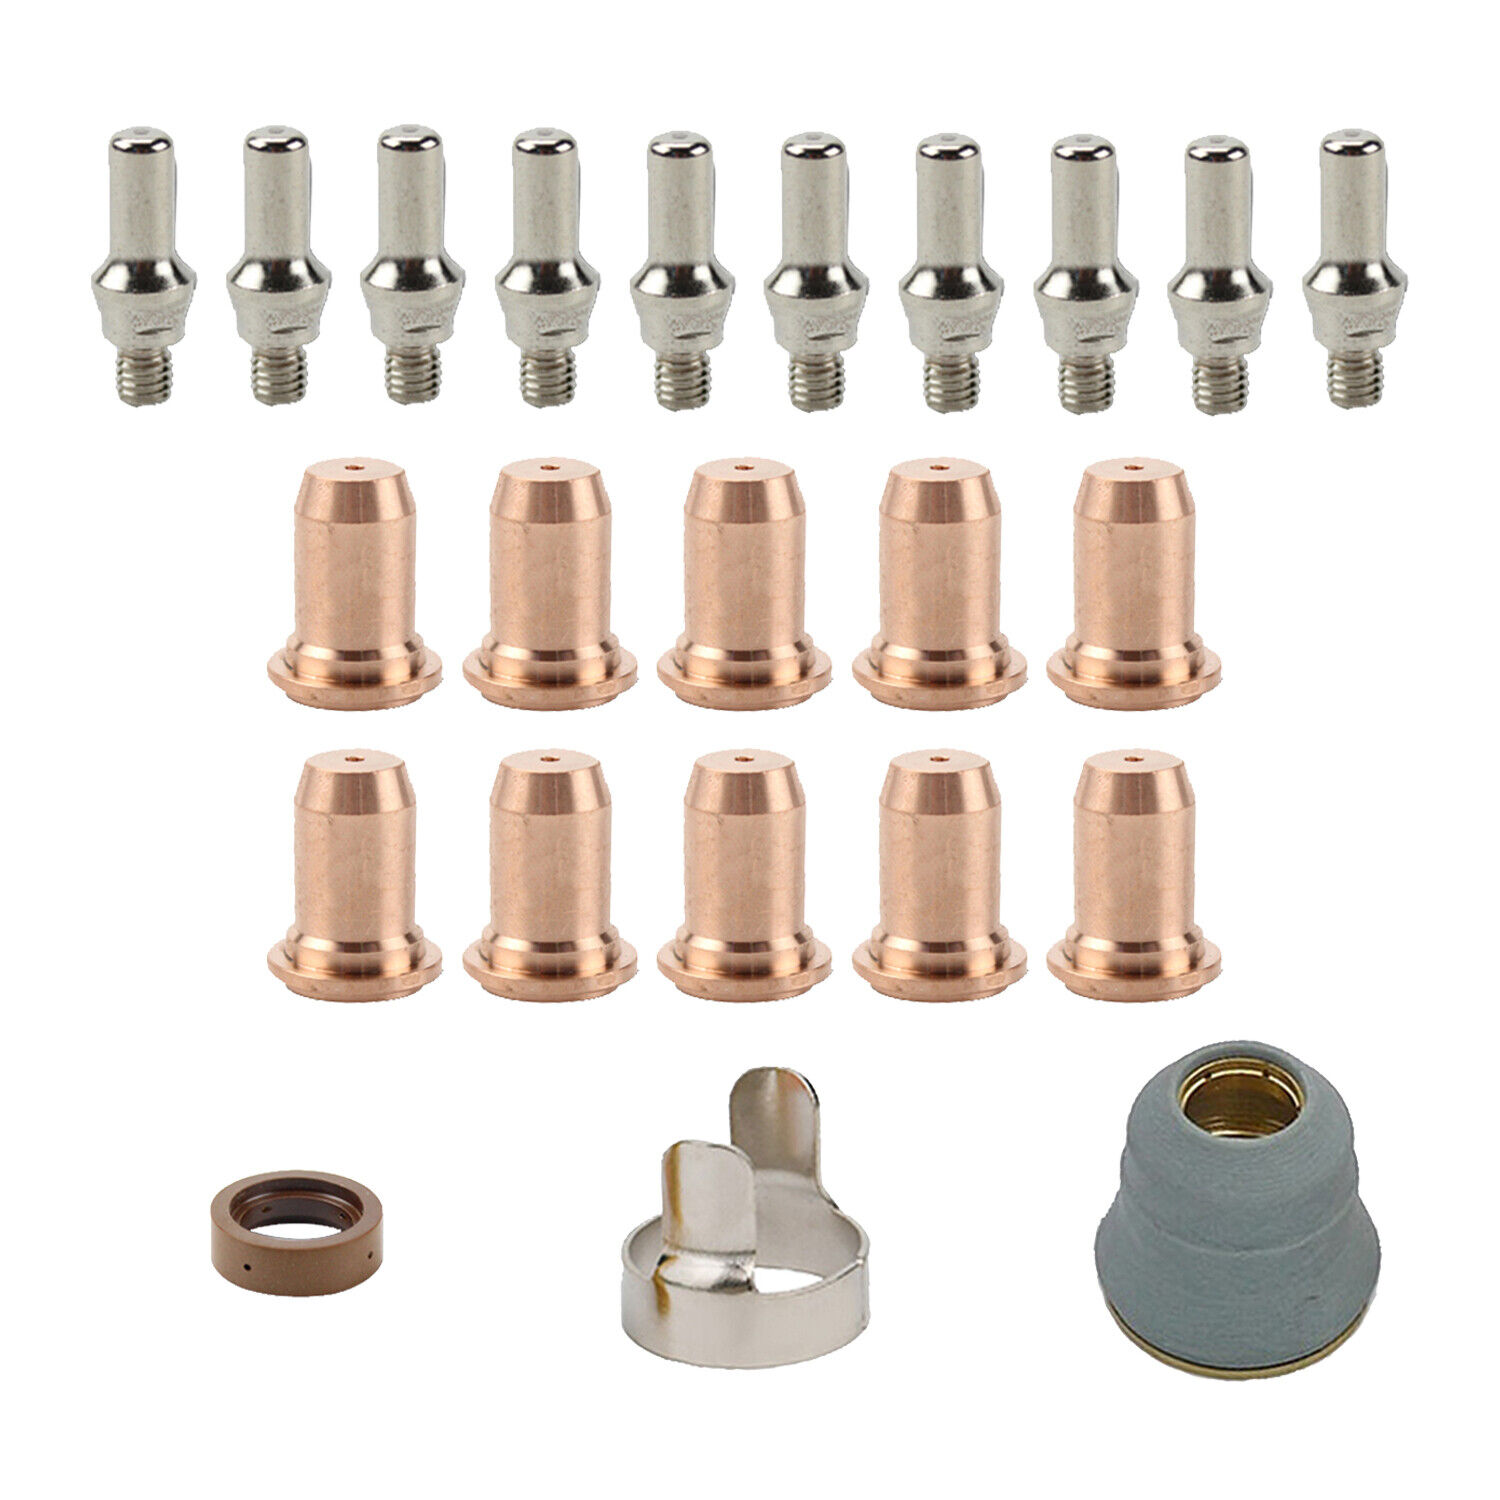 Cutting Electrode Tip Cup Consumables fit PrimeWeld CUT60 Plasma Cutter Parts